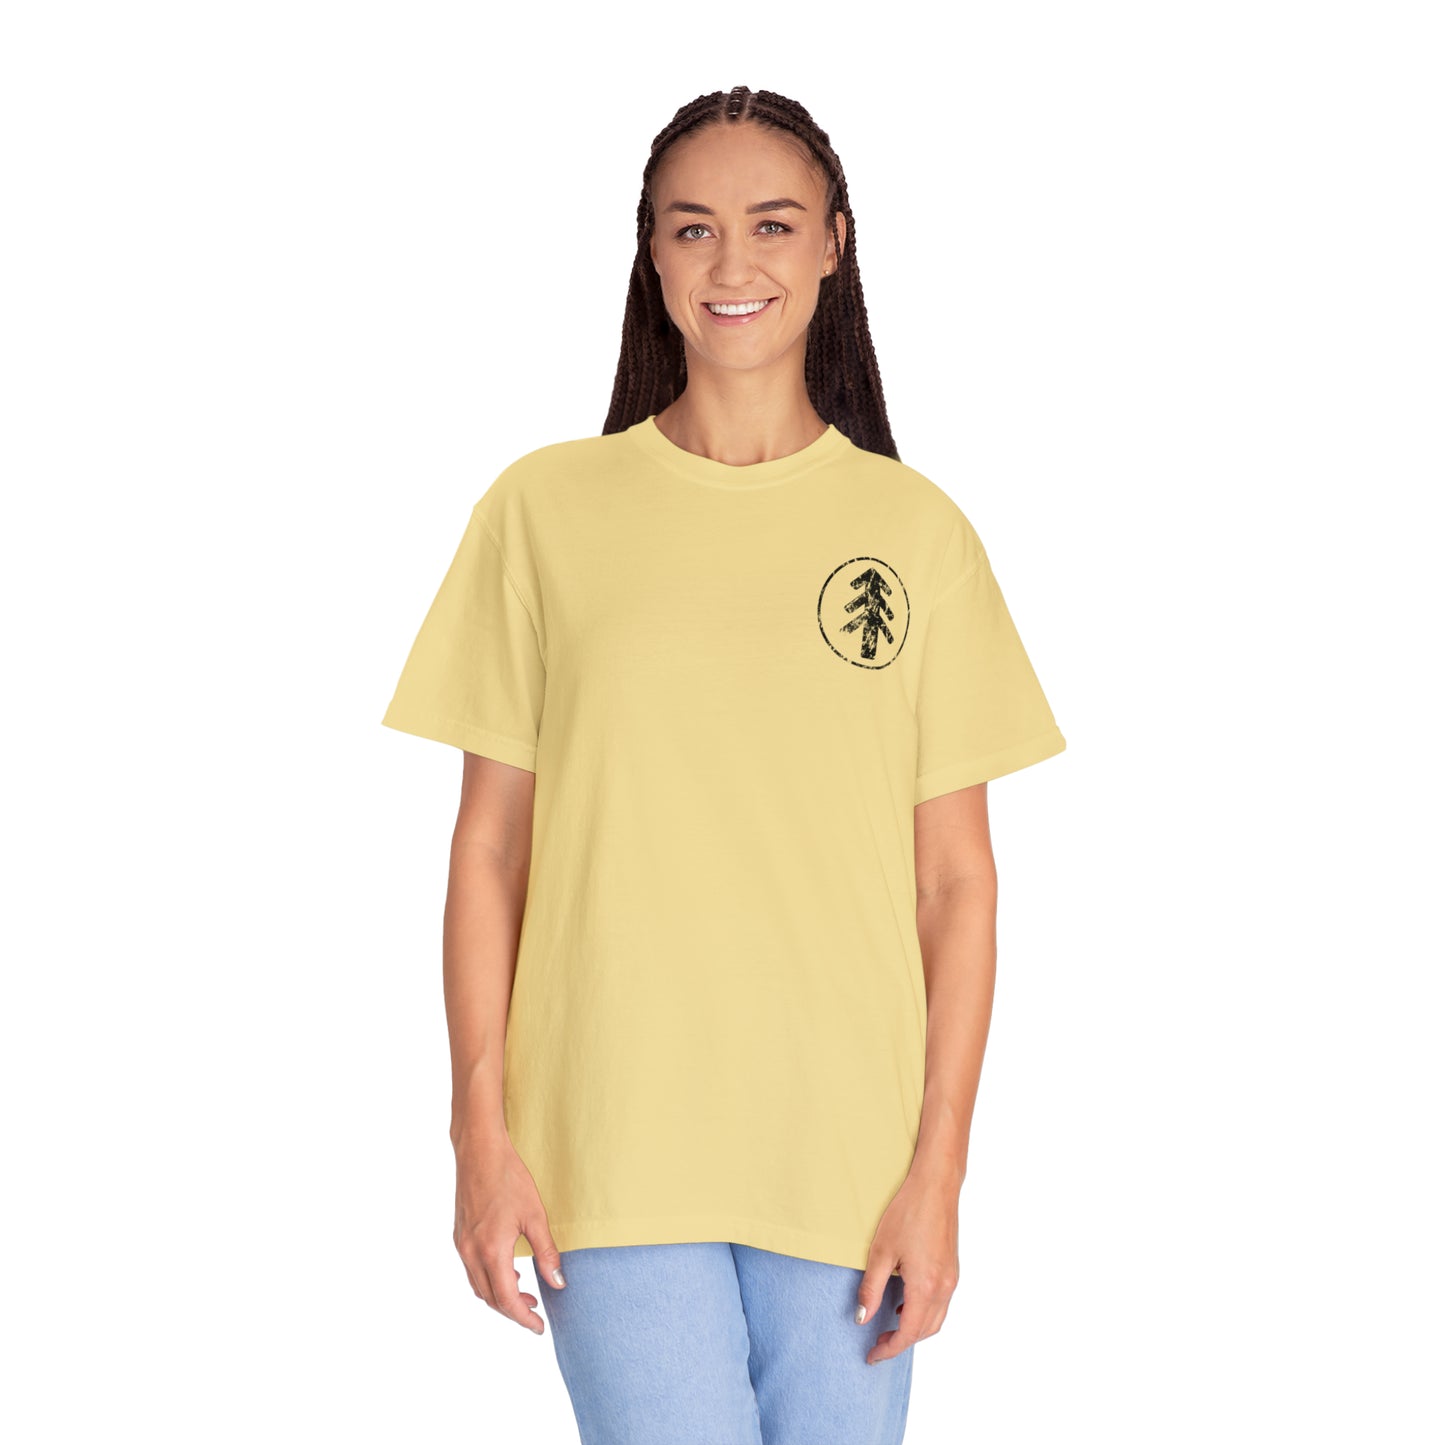 Outsider with Pine Tree Comfort Colors Unisex T-shirt